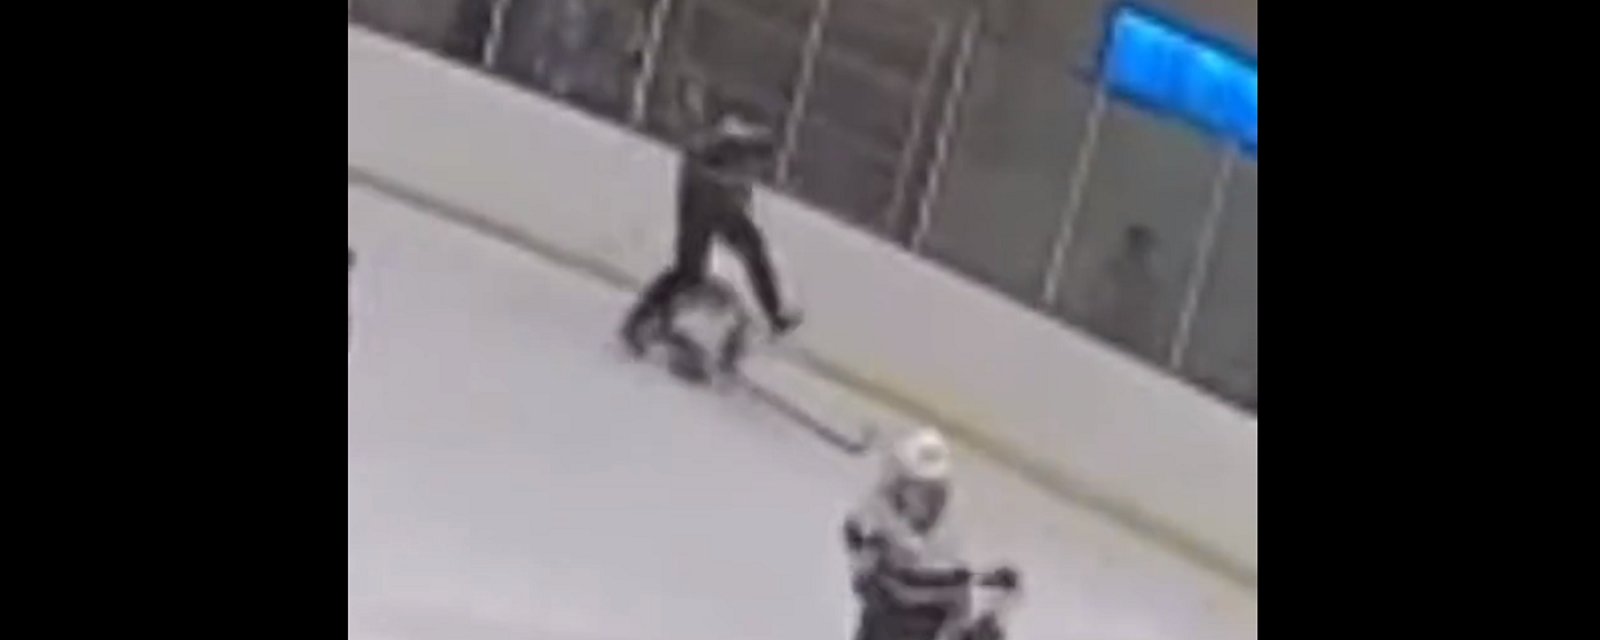 Hockey player attacked with a skate in extremely disturbing video.